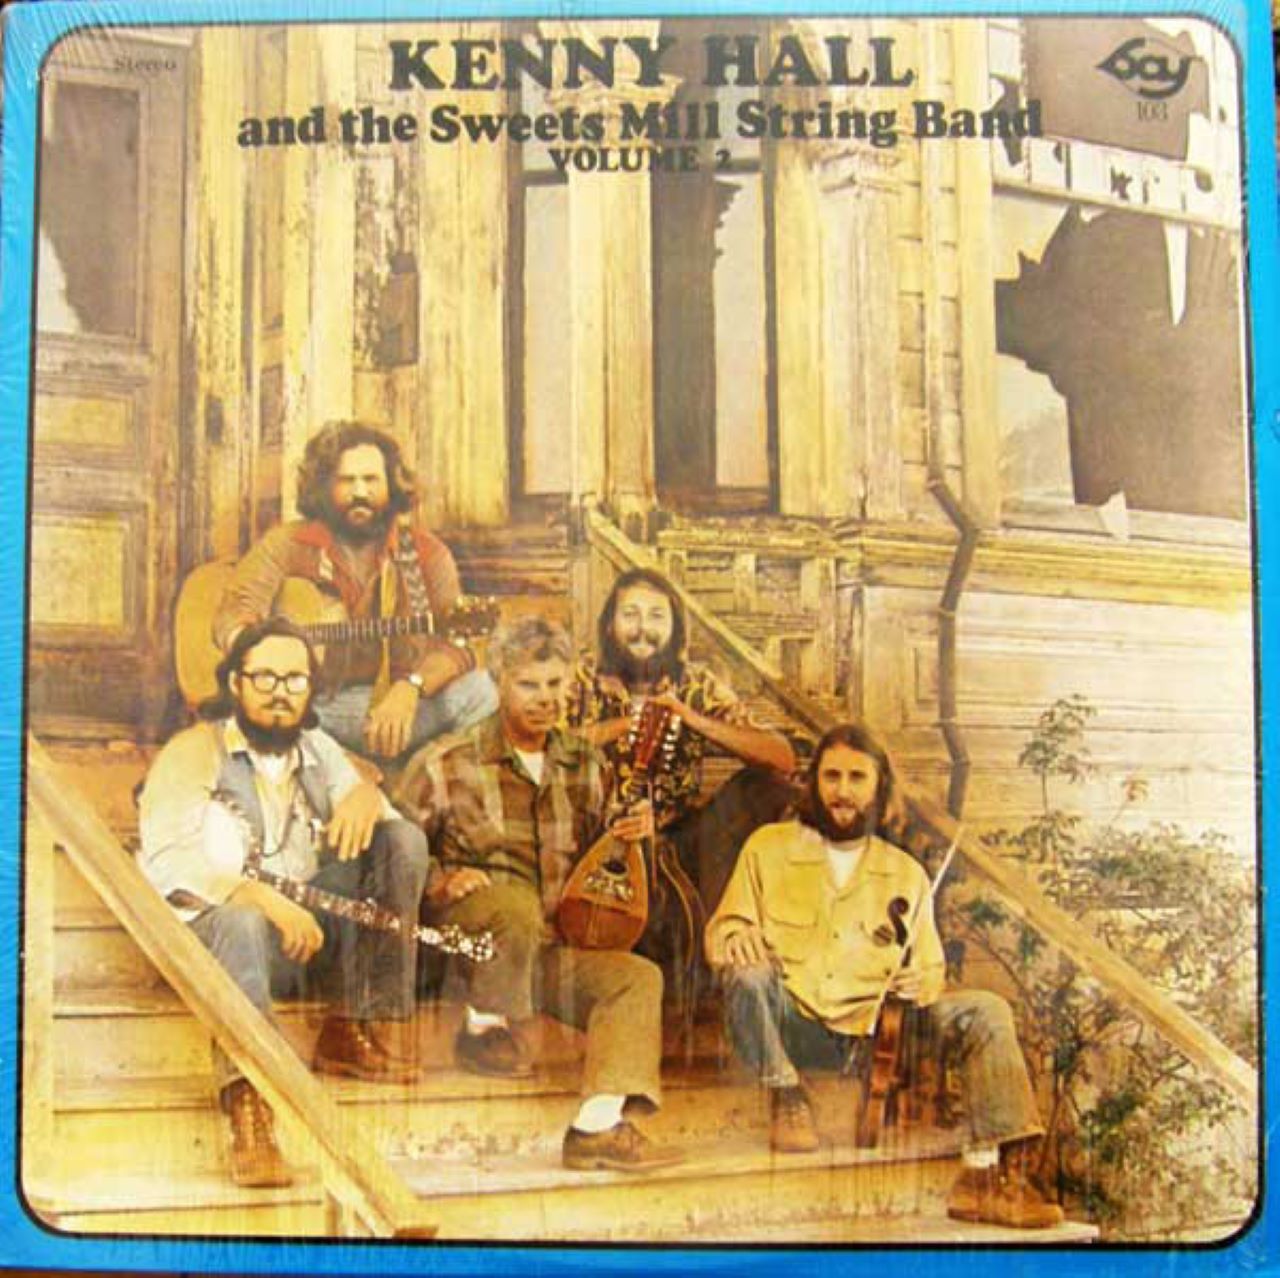 Kenny Hall & The Sweets Mill String Band - Volume 2 cover album